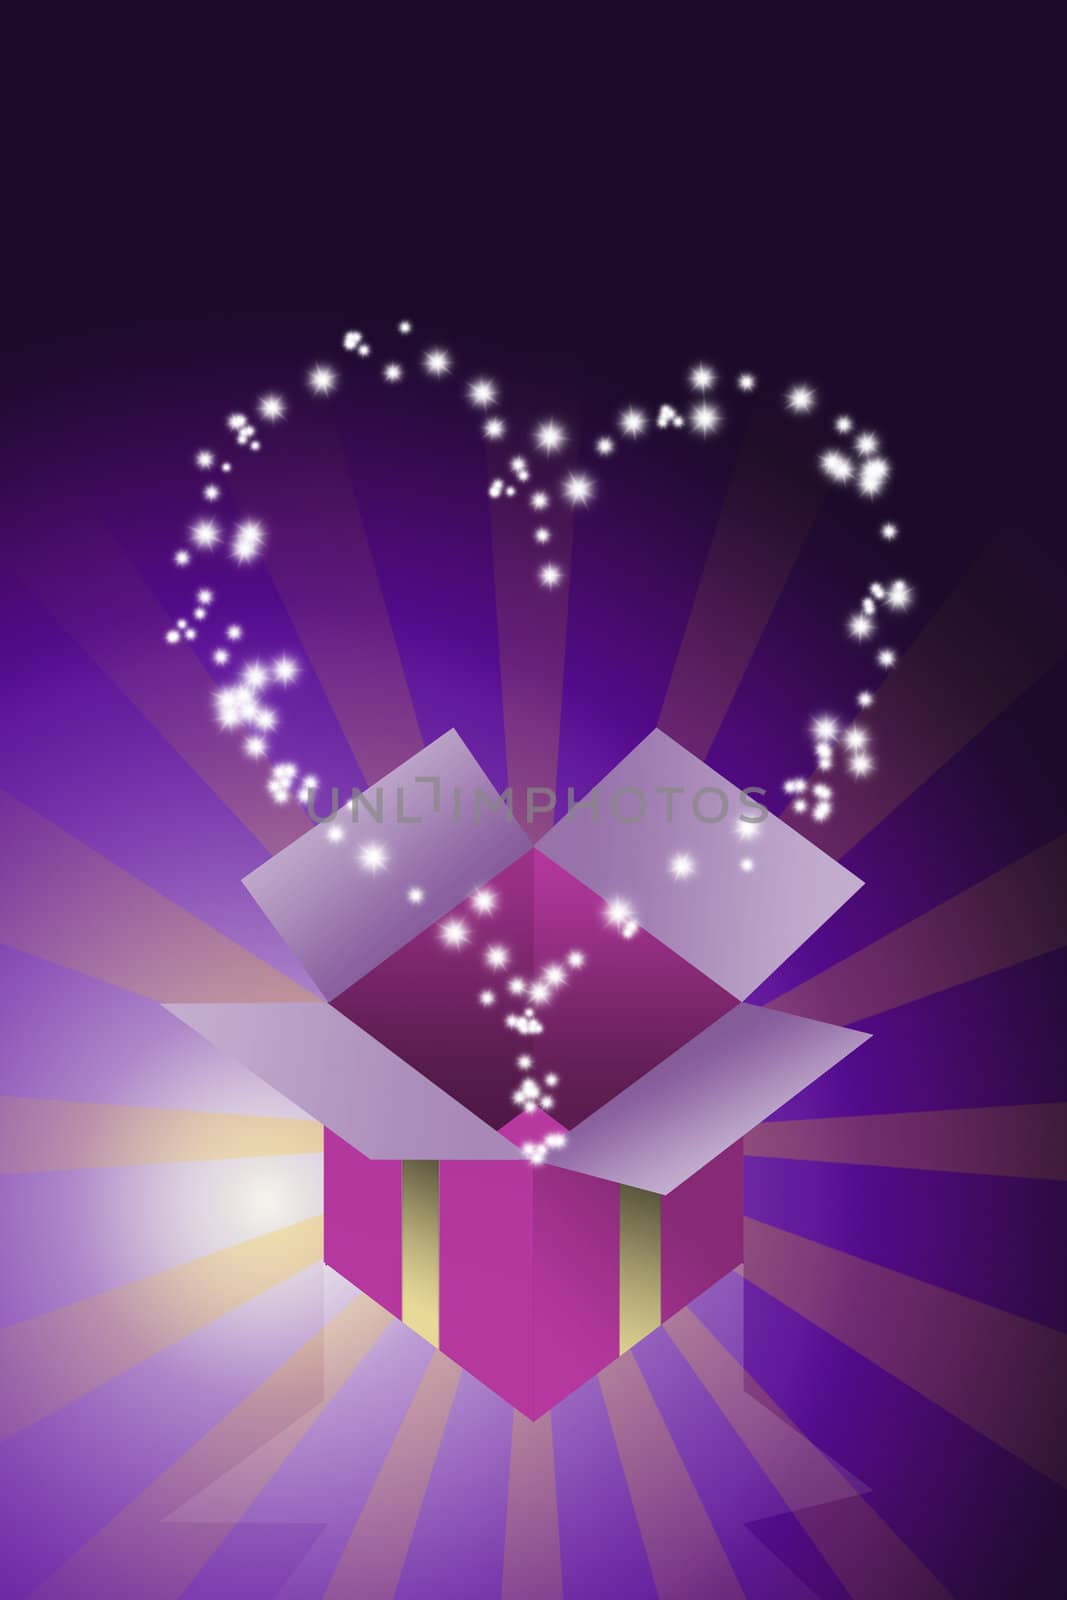 Blessing heart star flying from gift box with purple color background, Gift concept